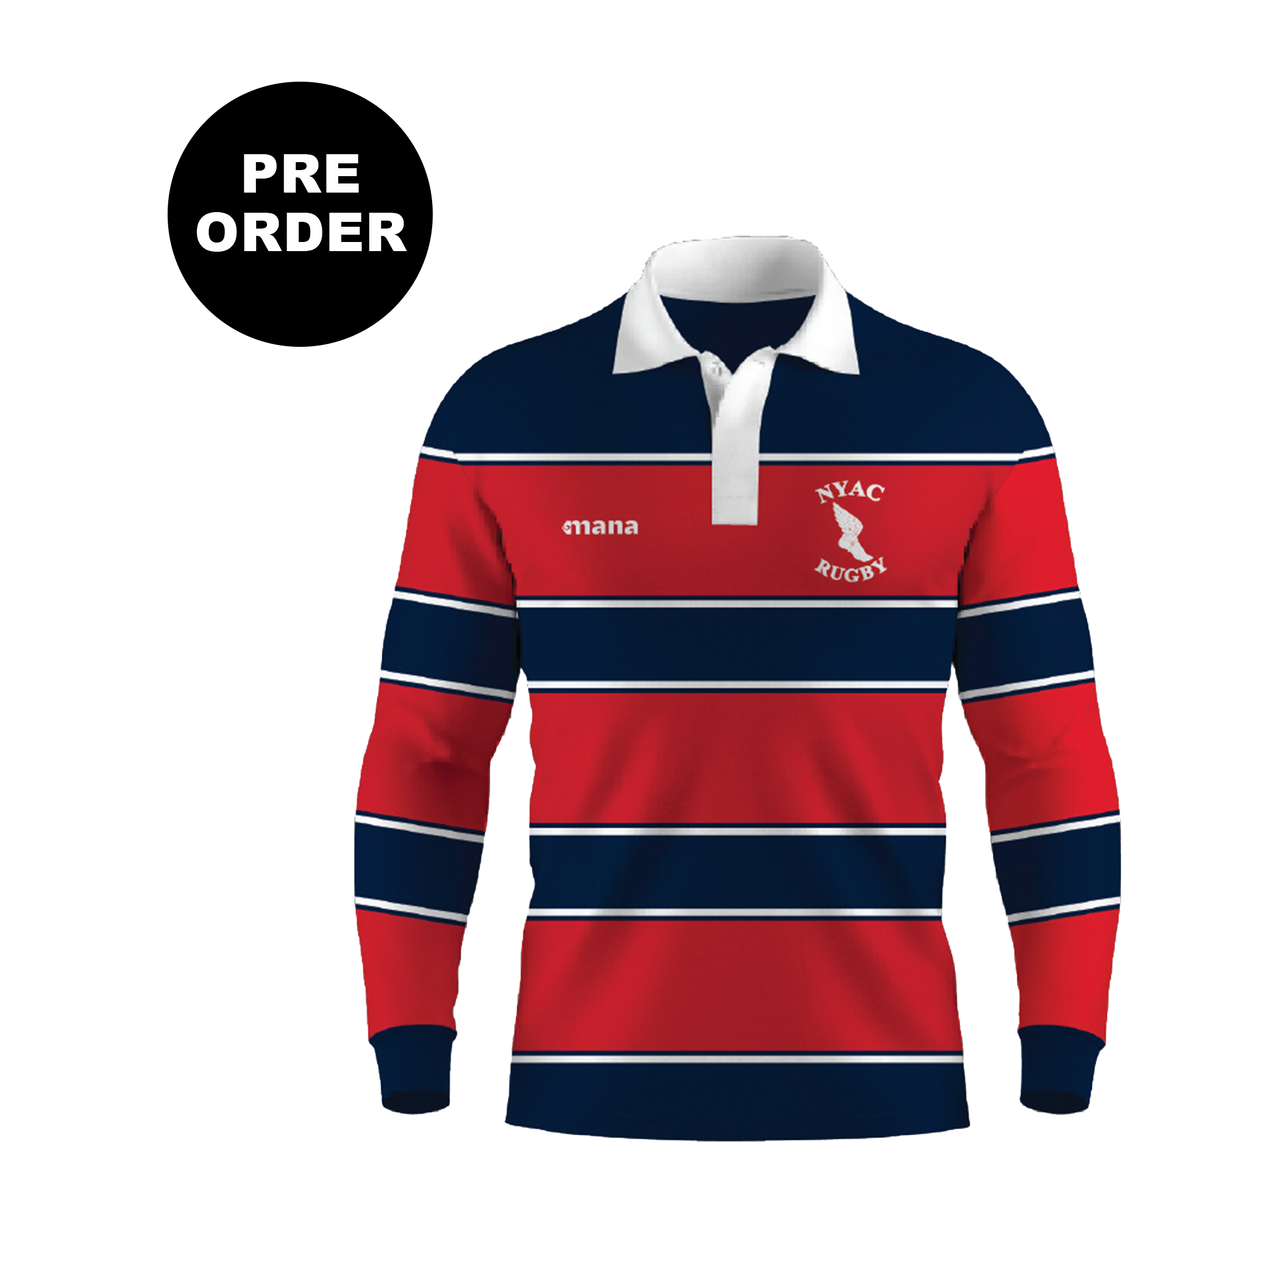 NYAC Rugby Classic Rugby Jersey